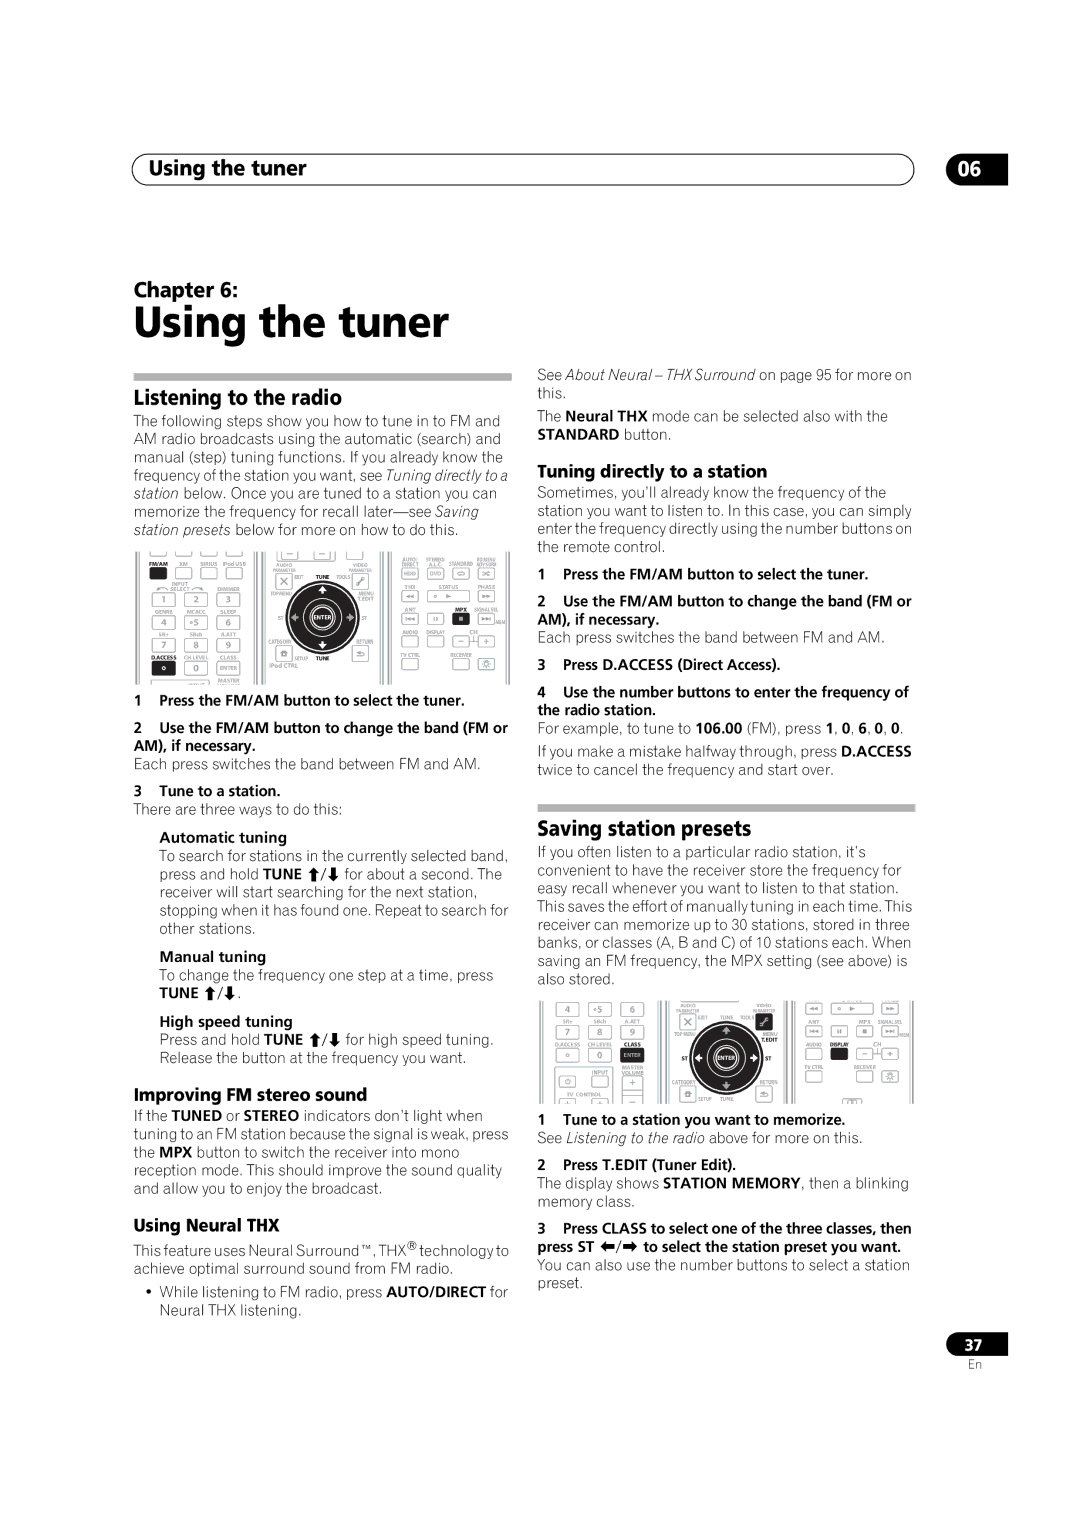 Pioneer VSX-03TXH manual Using the tuner Chapter, Listening to the radio, Saving station presets 